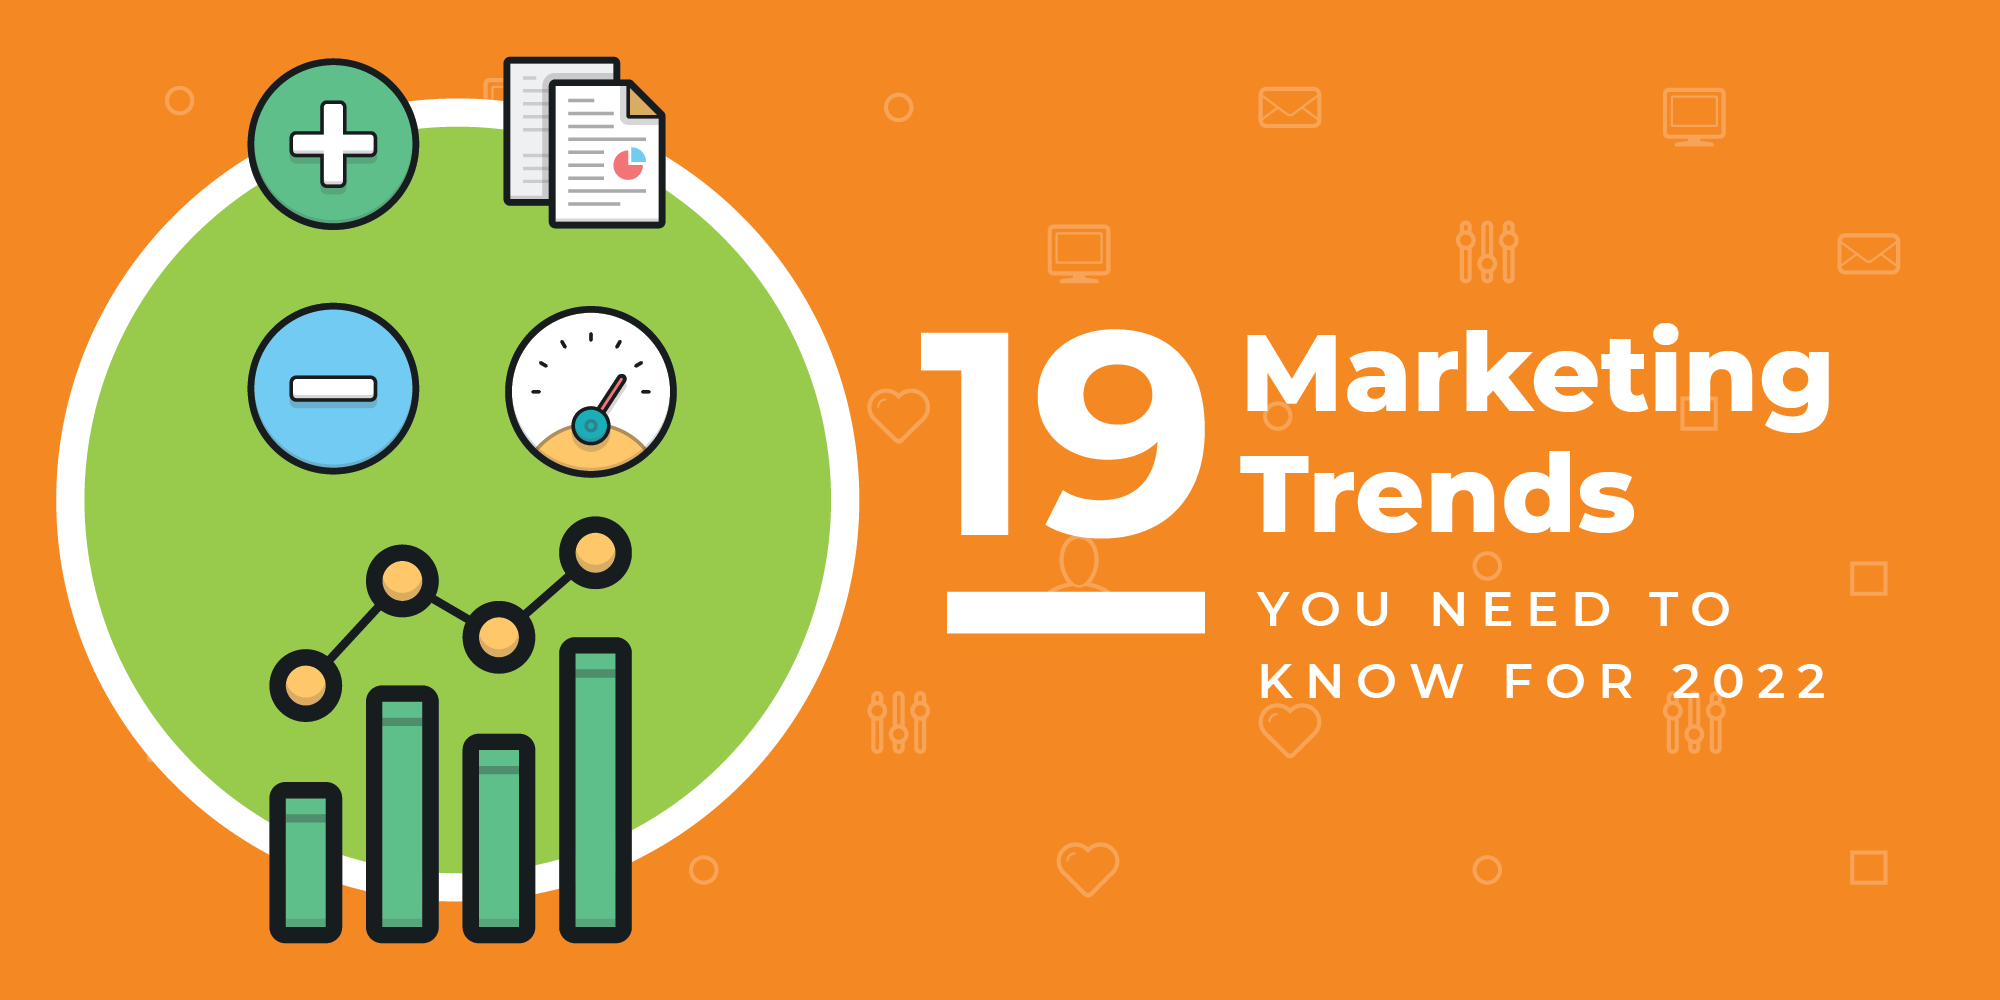 19 Marketing Trends You Need to Know for 2022